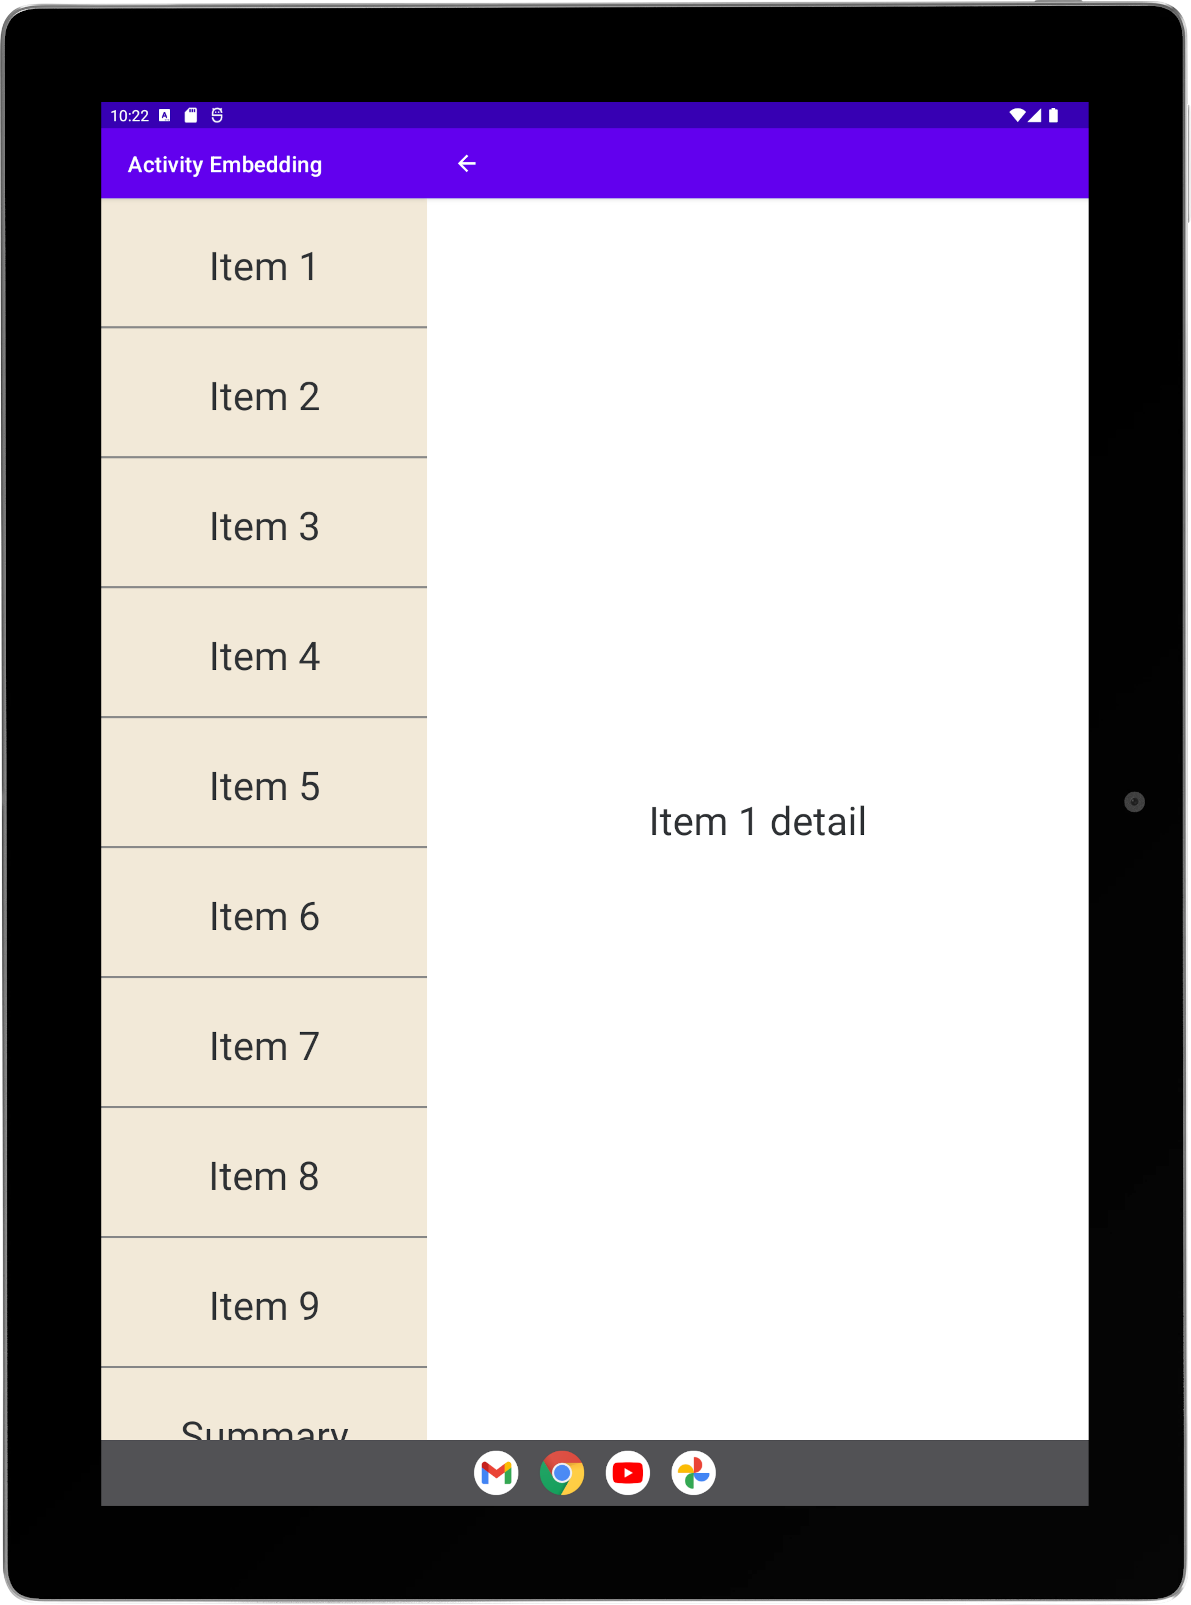 List and detail activities side by side in portrait orientation on large tablet.